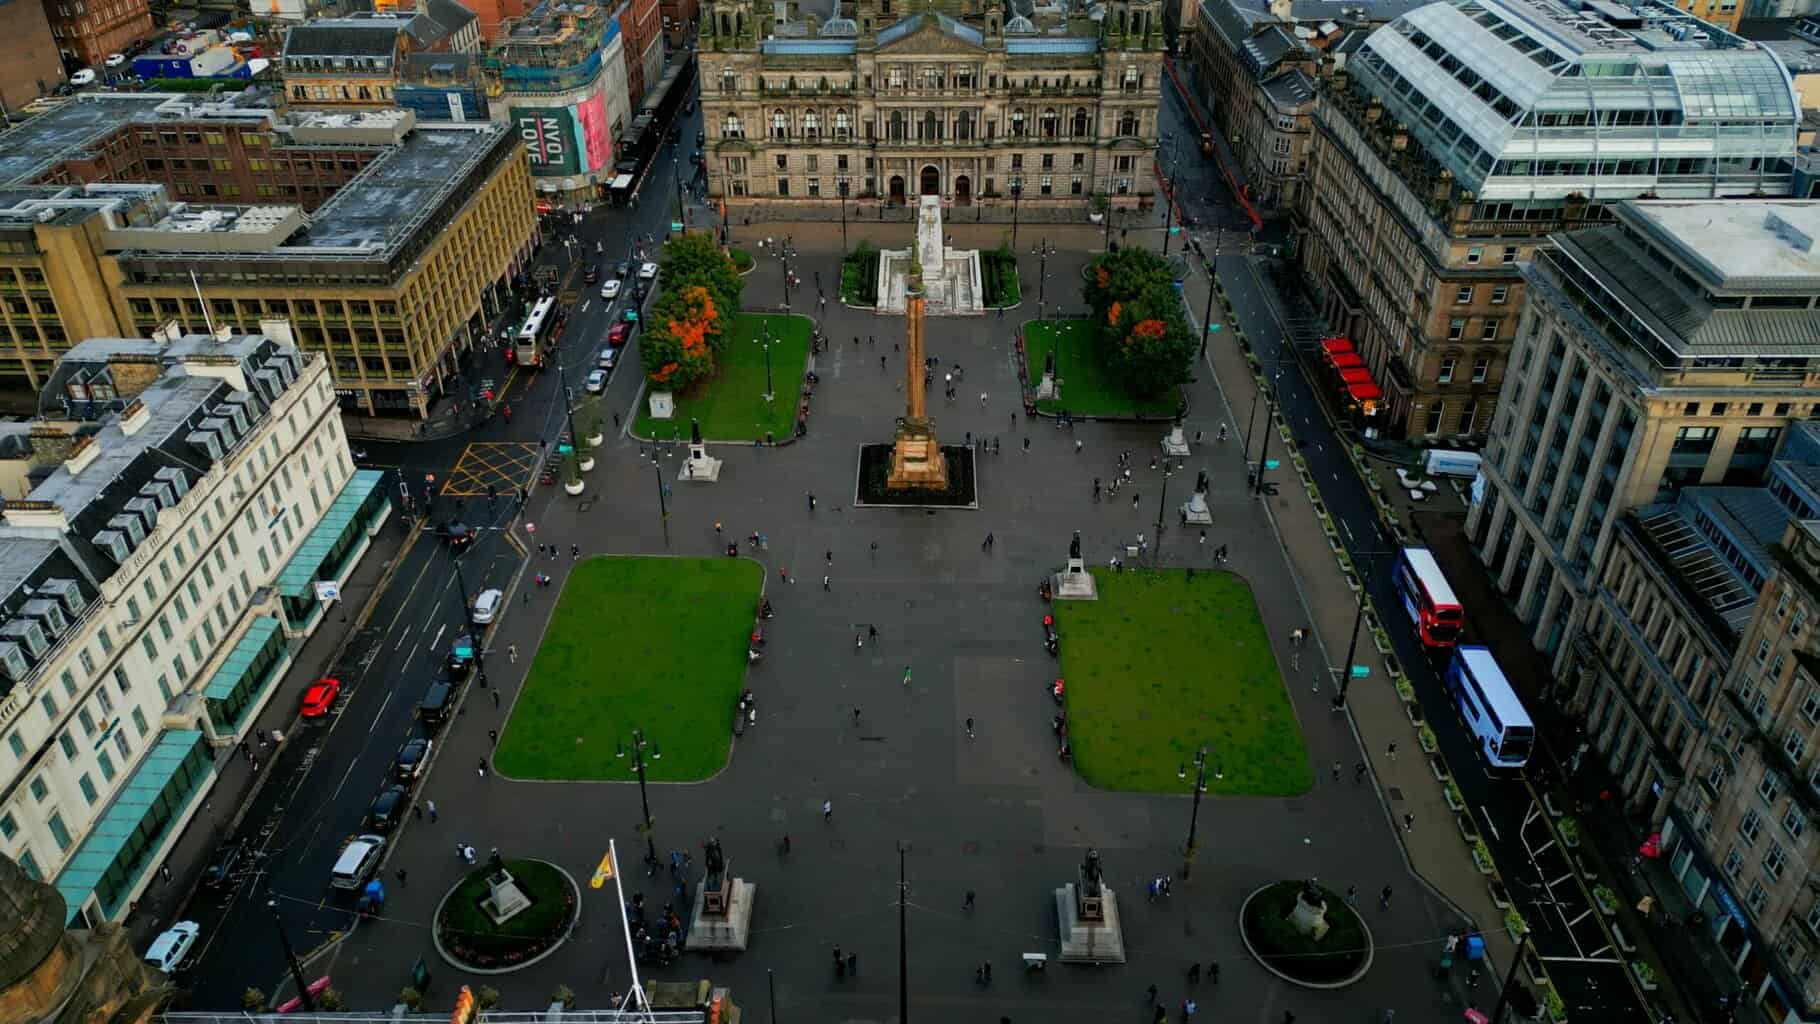 George Square min scaled The best-selling author Diana Gabaldon has managed to create a world that has captivated fans and readers for decades. Even though she hadn't set foot in Scotland when she began writing her book series Outlander, the basis of the popular TV series of the same name, she did capture the history and culture of the beautiful country. 